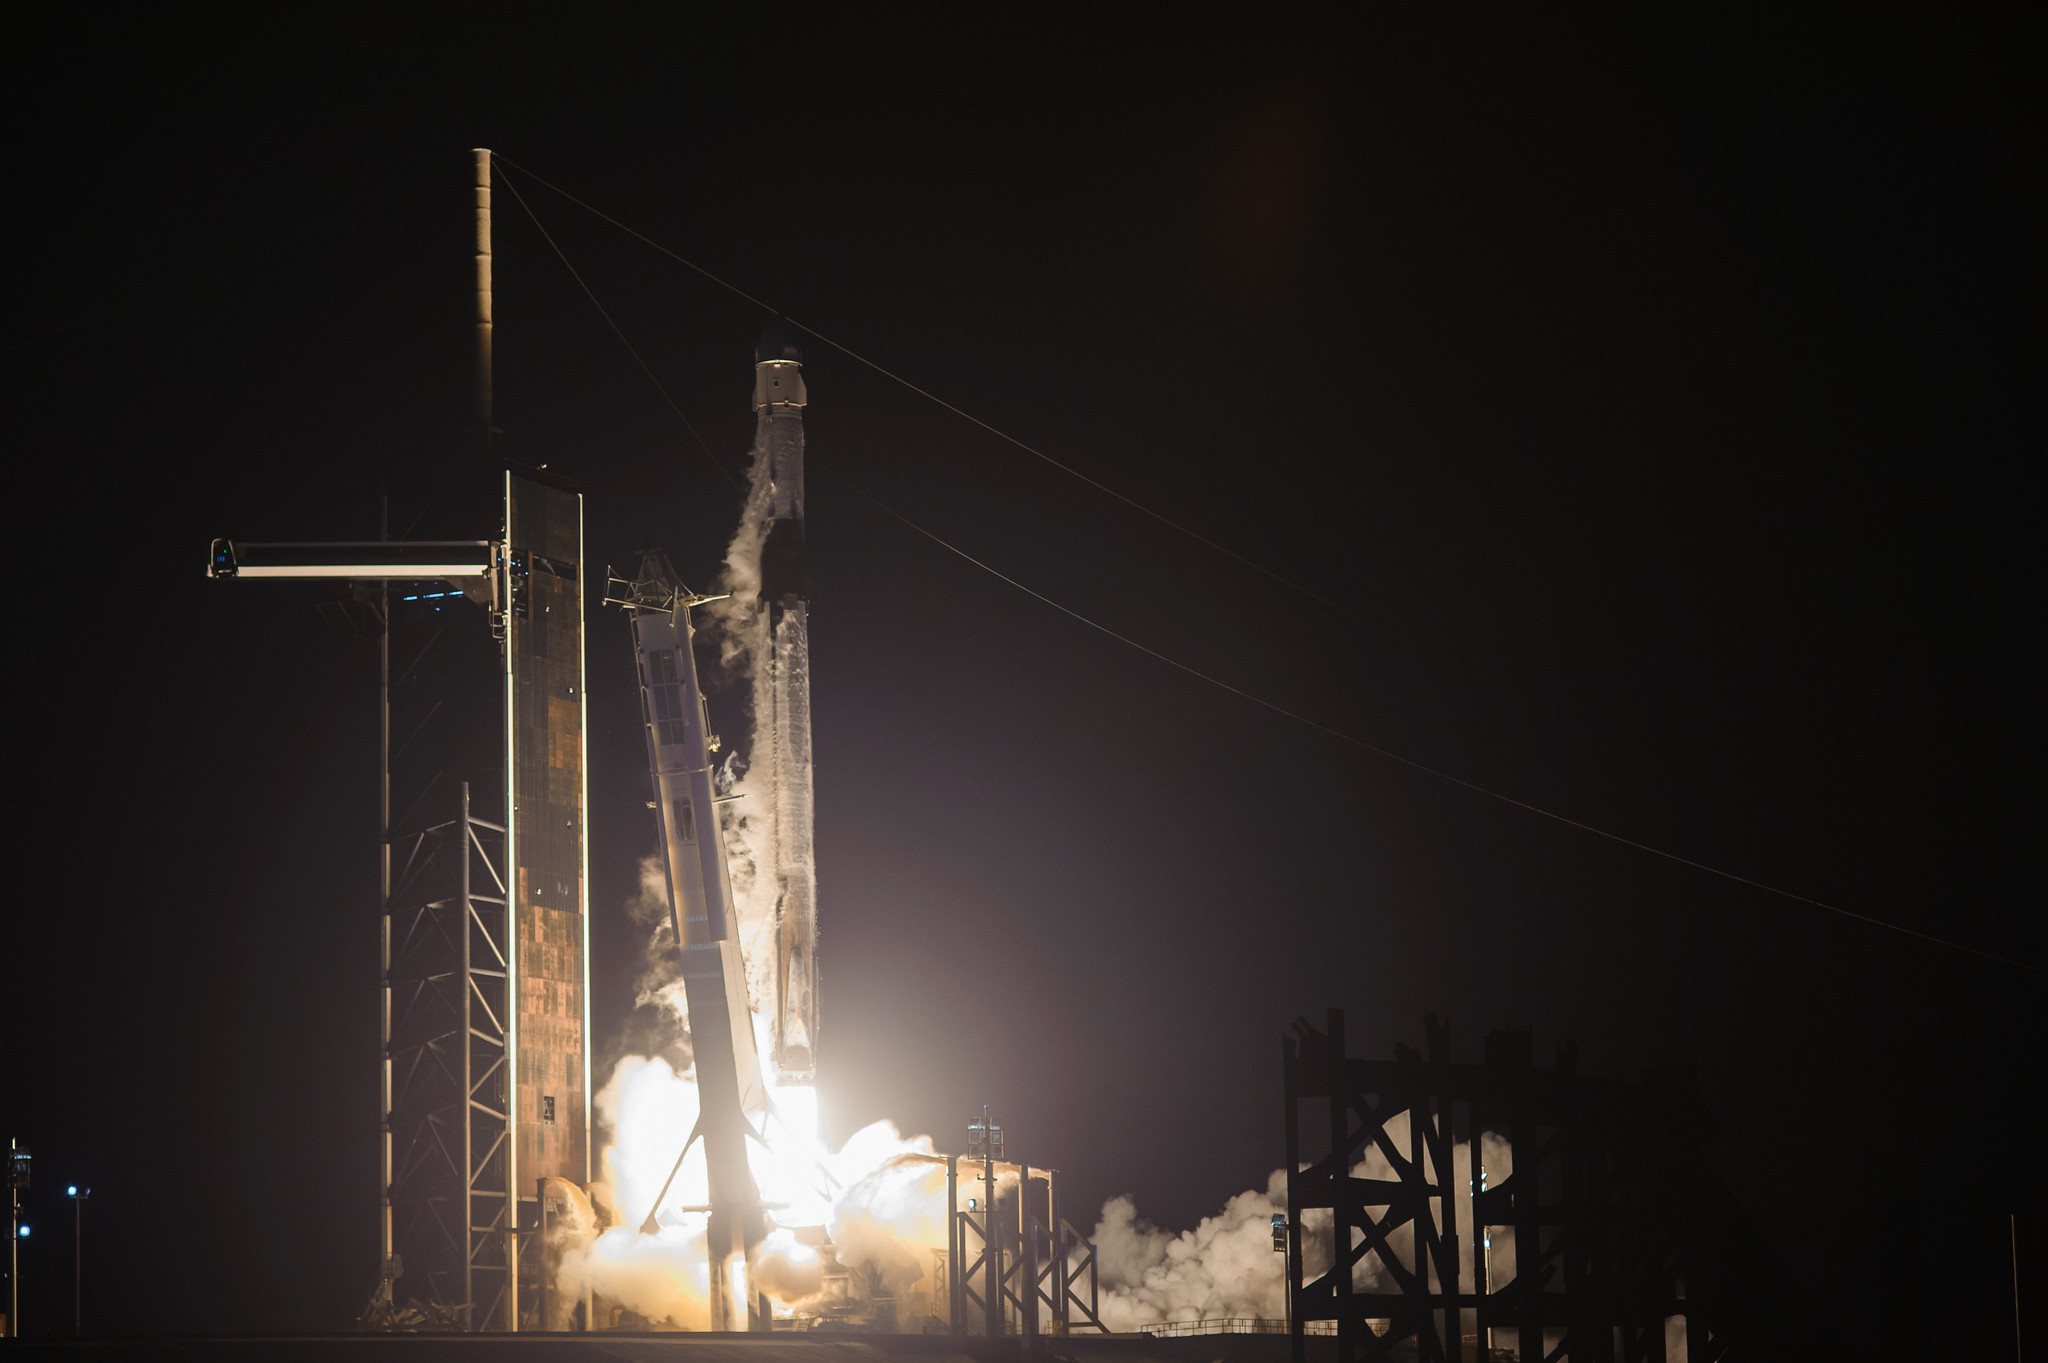 A SpaceX Falcon 9 rocket at Launch Complex 39A at NASA’s Kennedy Space Center in Florida on Aug. 29, 2021, carrying the Dragon spacecraft on its journey to the International Space Station for NASA and SpaceX’s 23rd commercial resupply mission.